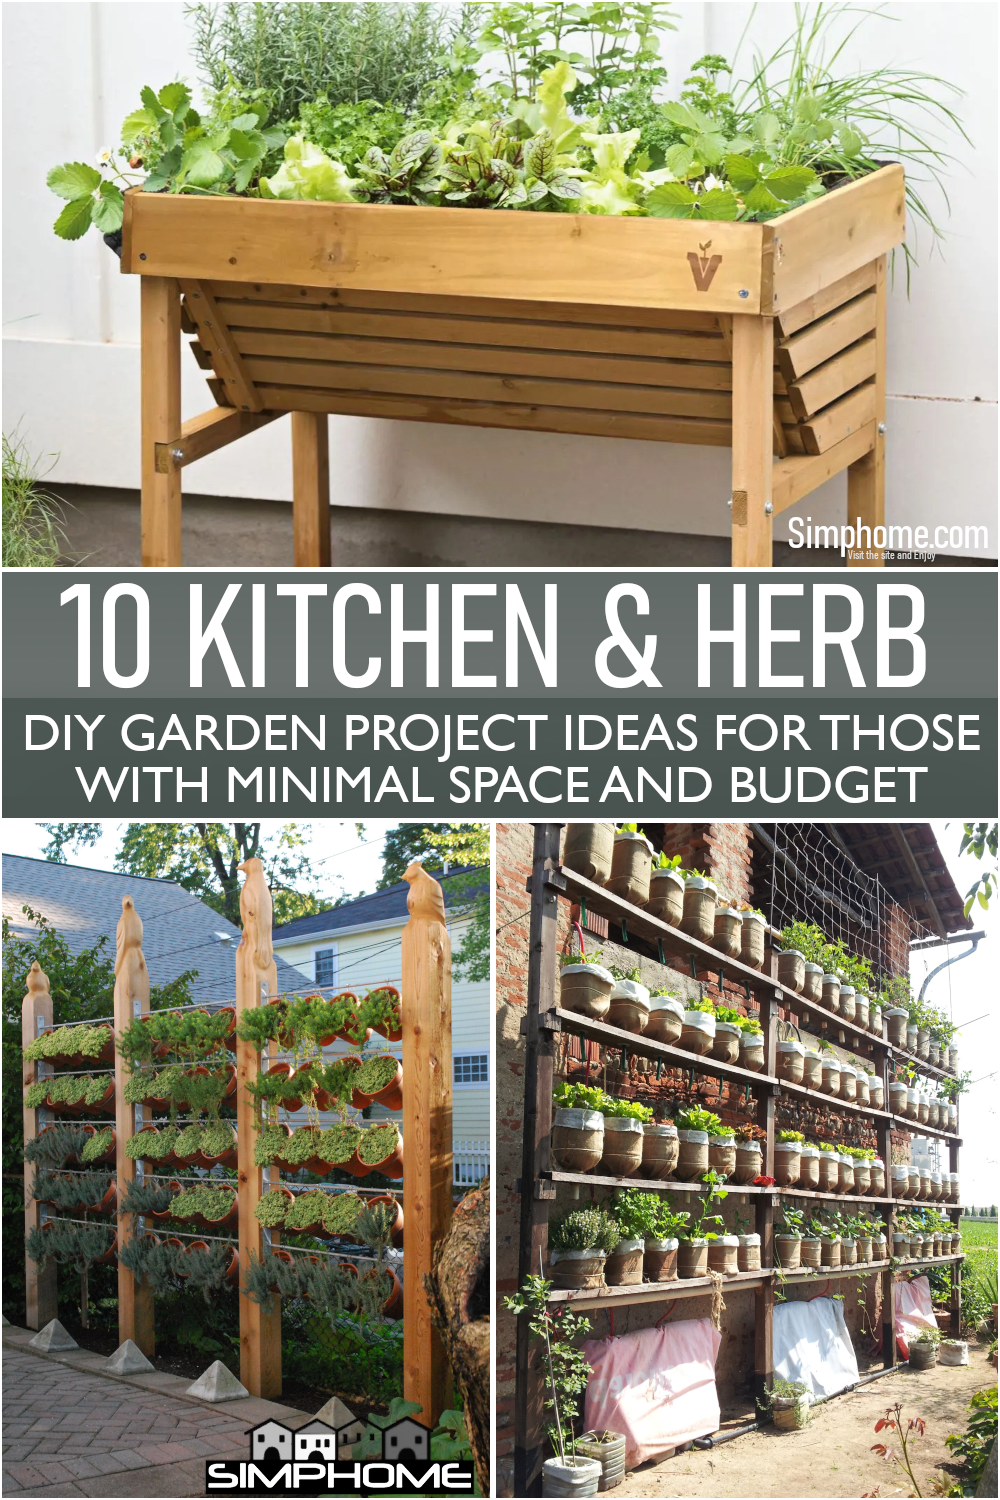 This is awesome Kitchen Garden and Herb Garden Idea via Simphome.com